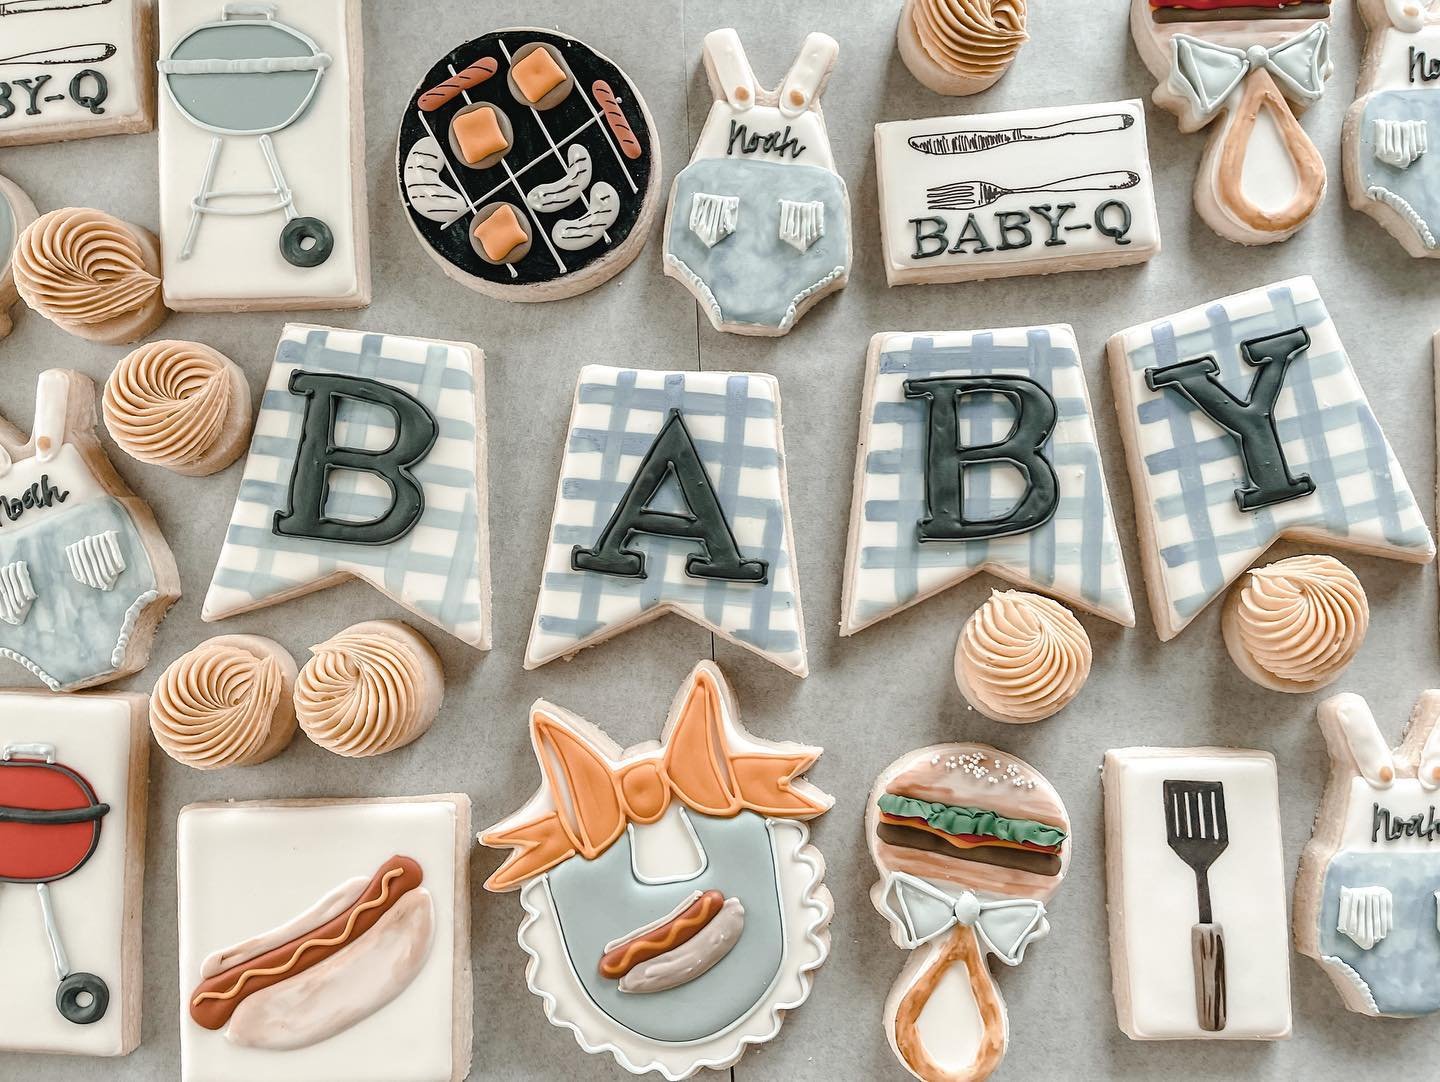 MH-Cookie-Shoppe-Baby-shower-decorated-cookies-custom-design-cookies01.jpeg